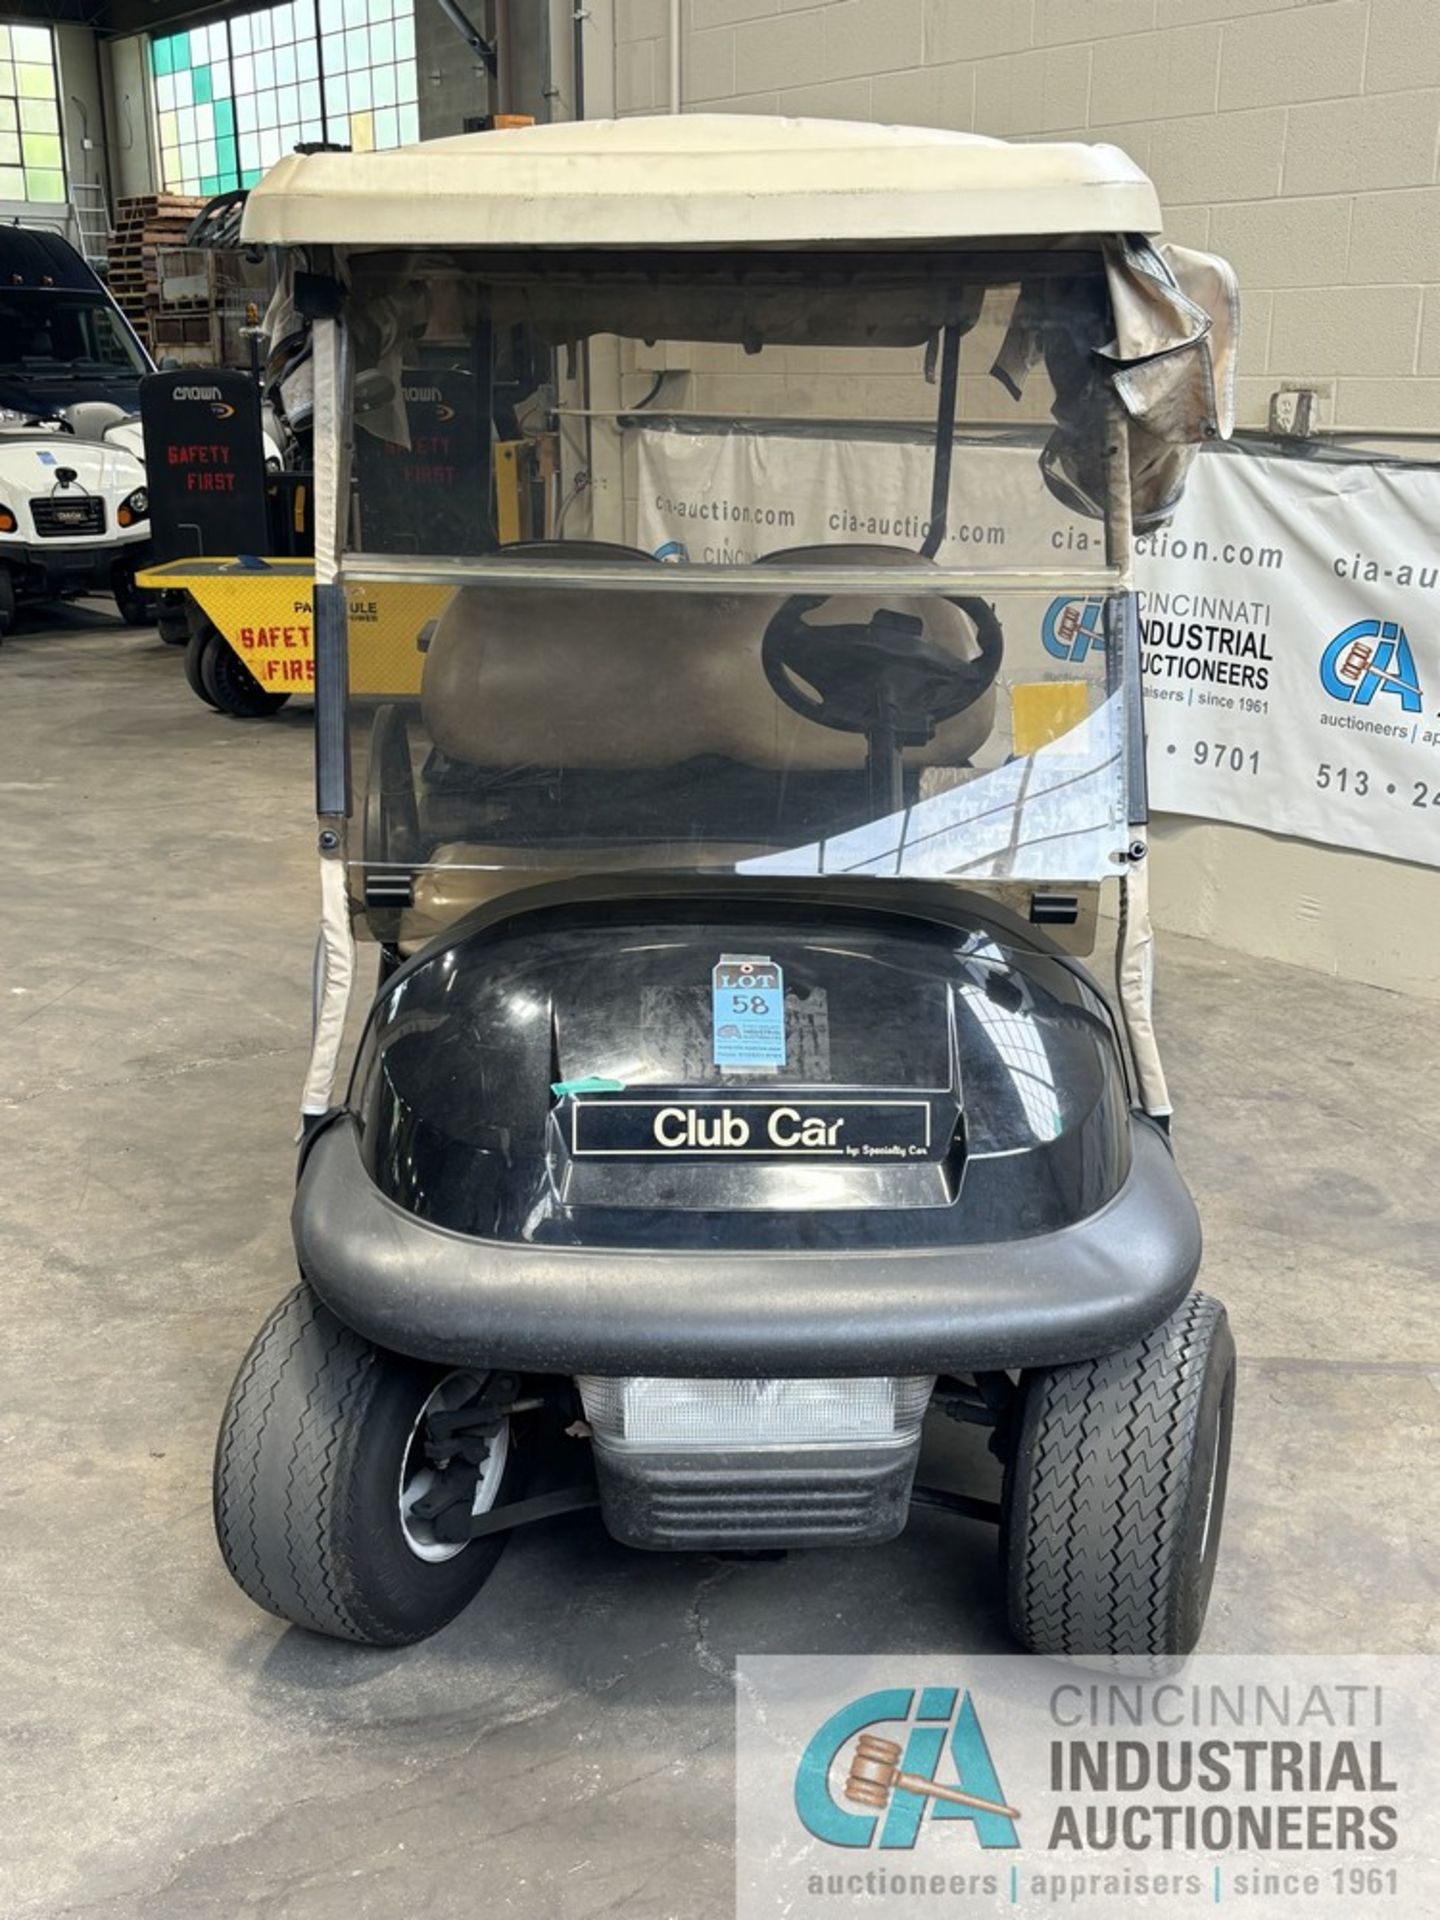 2015 CLUB CAR FOUR-PASSENGER ELECTRIC GOLF CART; S/N JH1541-596913, 48-VOLT, HOURS N/A, No Charger - Image 2 of 7